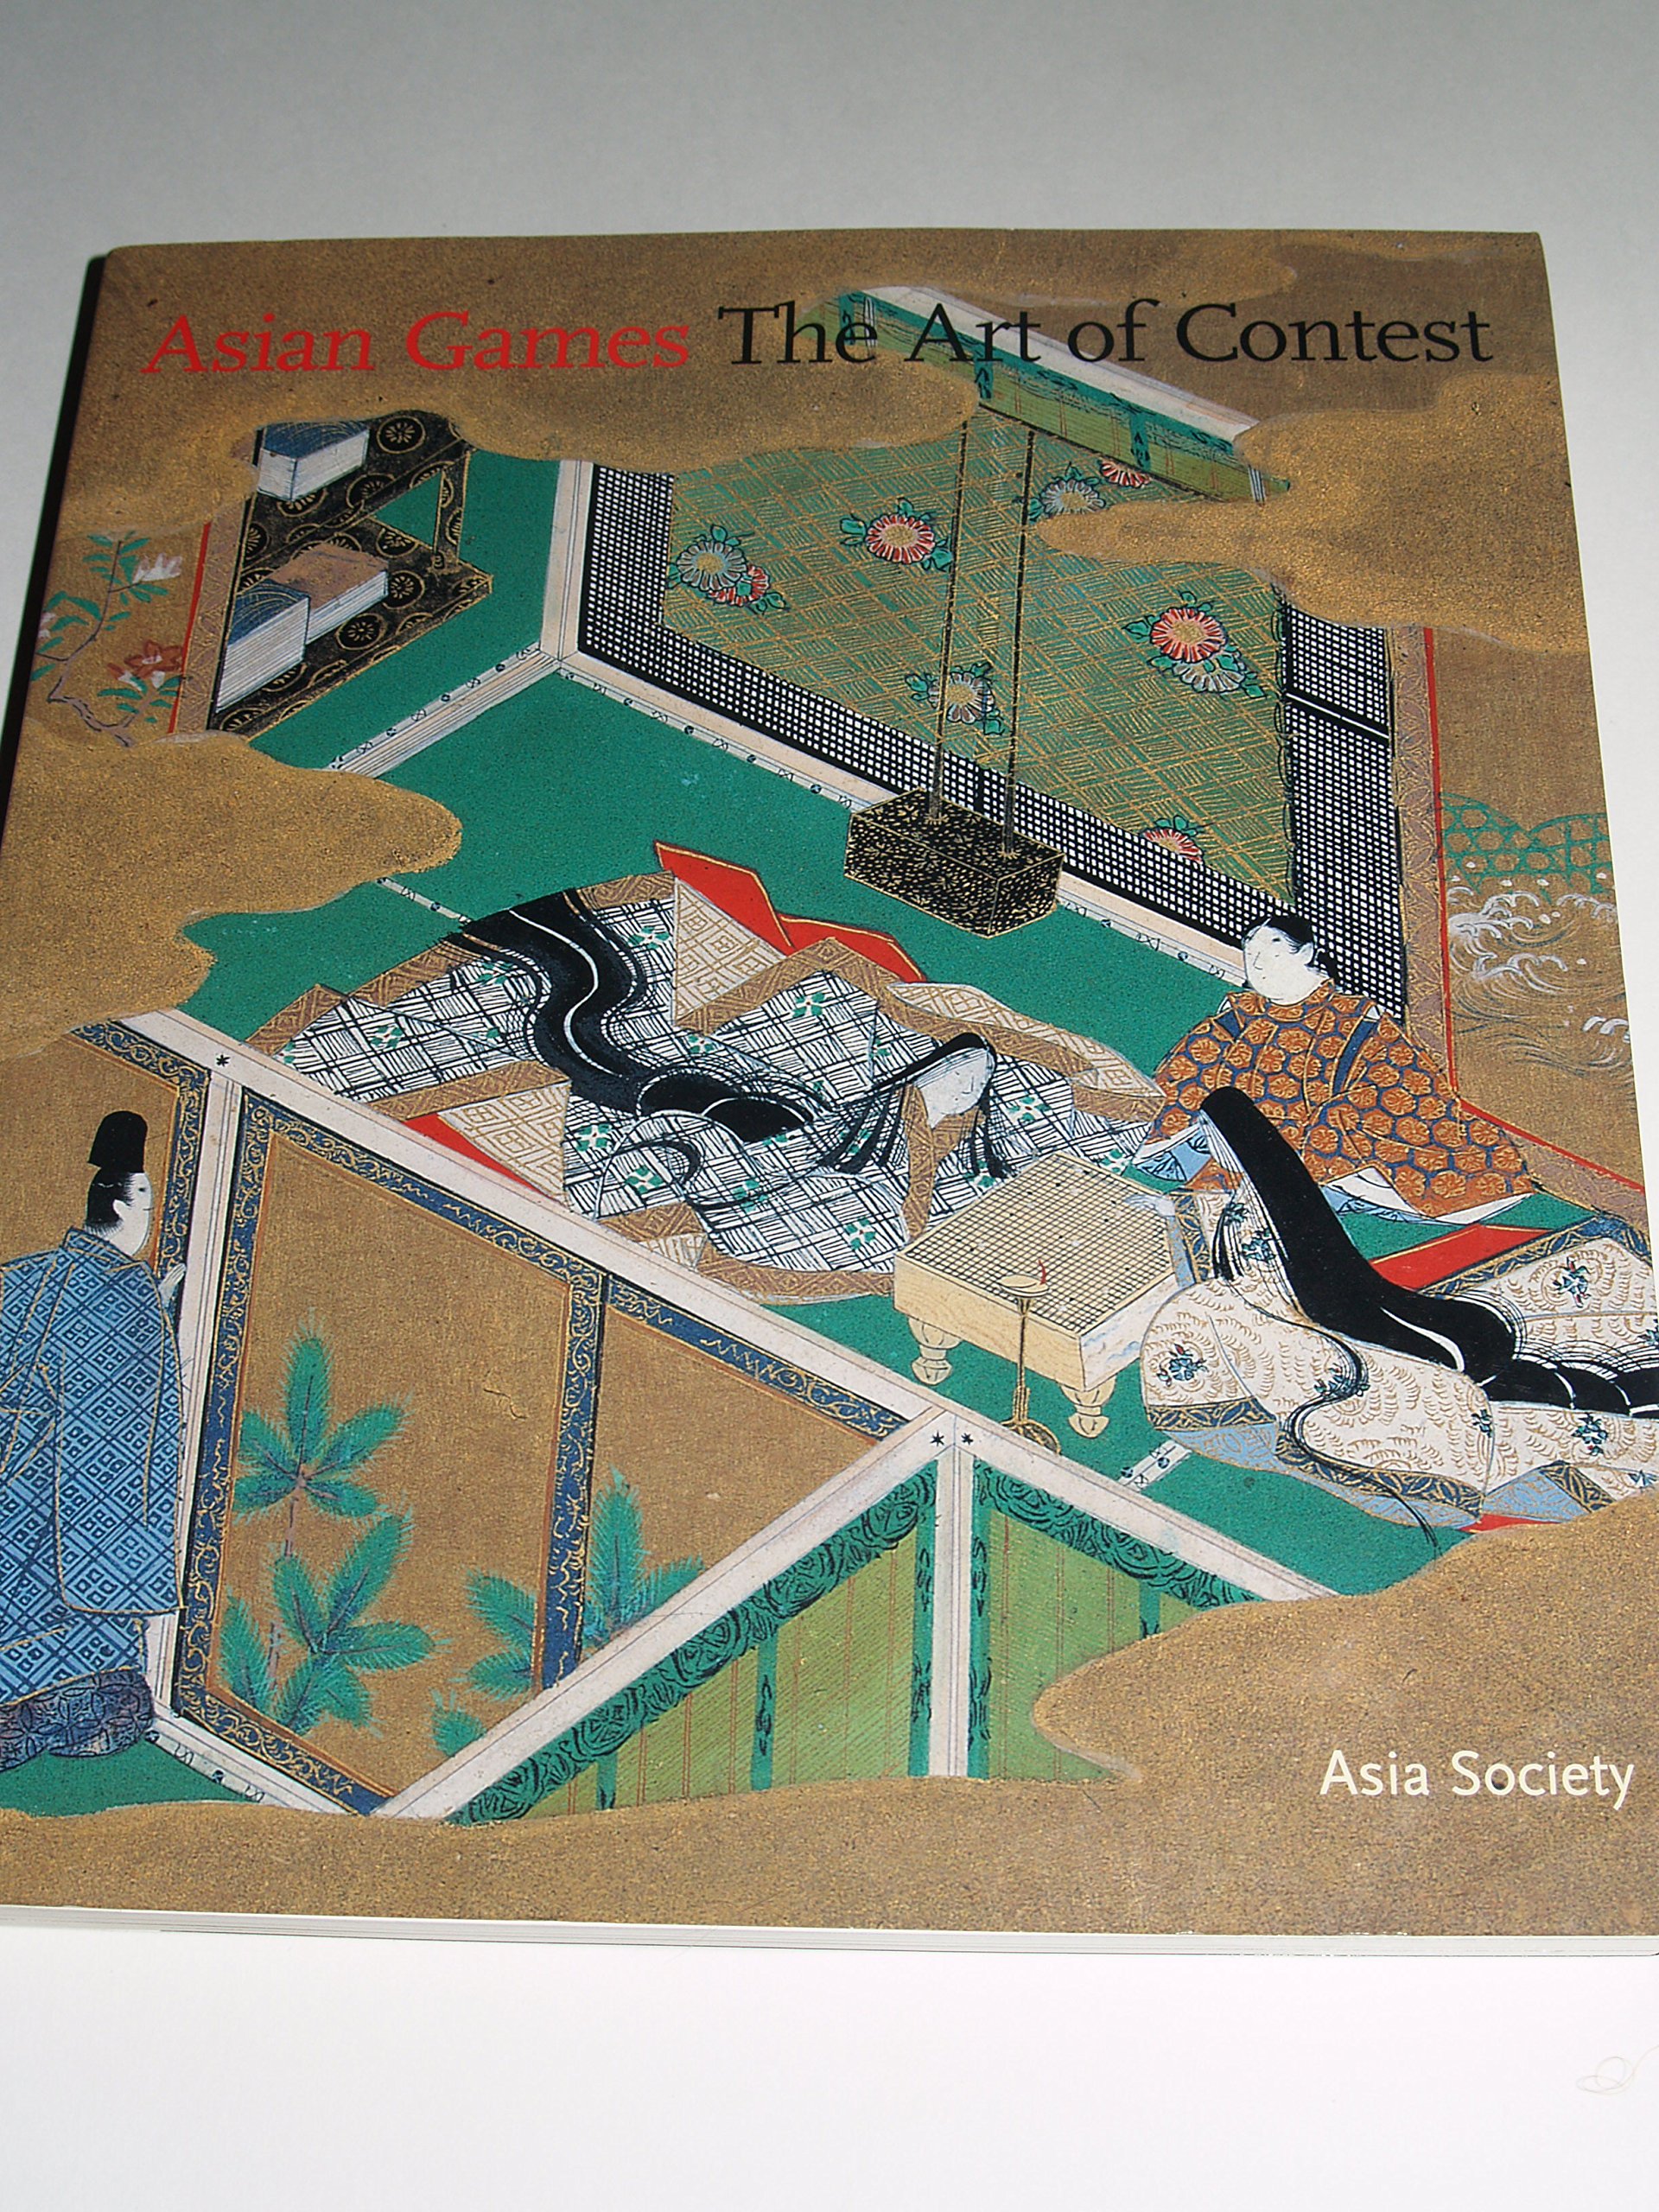 Irving L Finkel, Colin MacKenzie, Asian games: the art of contest